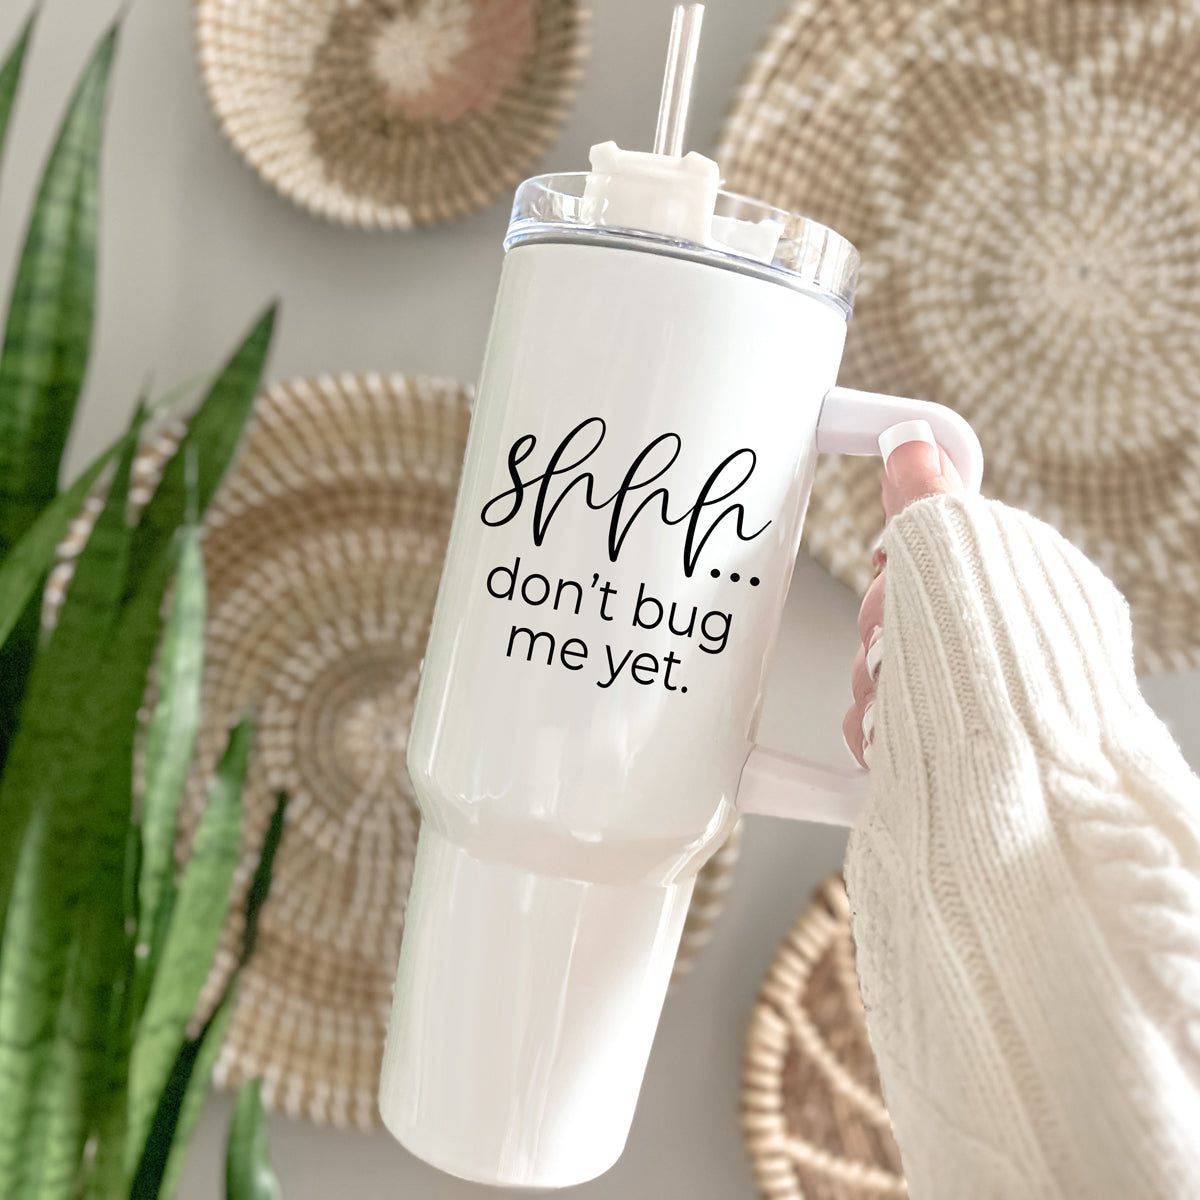 Don't Bug Me 40oz - Stay Cool or Cozy Anywhere with Our Insulated Mug!